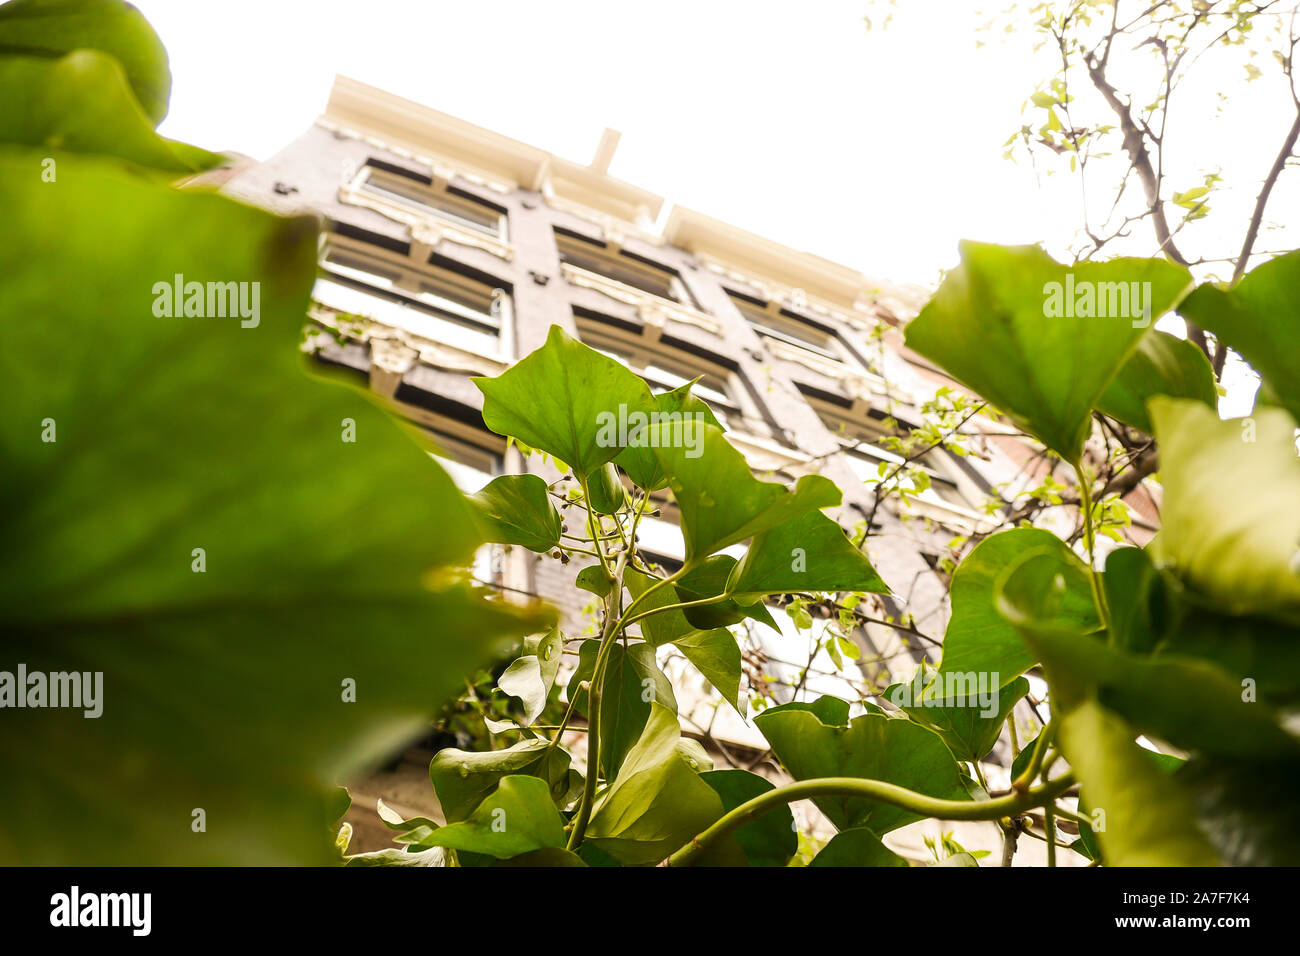 Broad green plant leaves and elegant building exterior. Directly below. Stock Photo